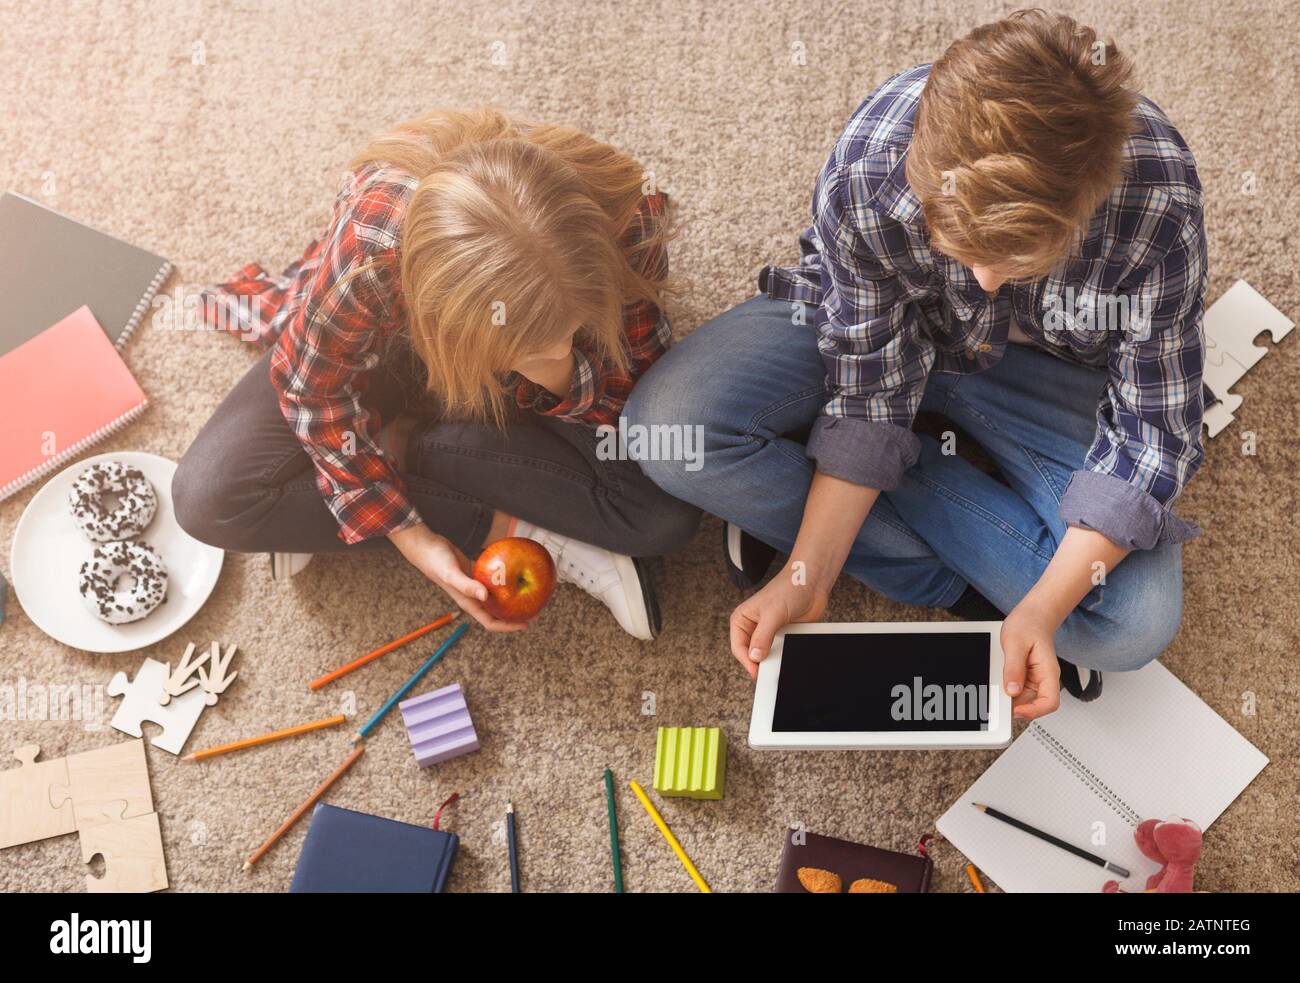 Brother And Sister Using Digital Tablet Sitting On Floor, Above-View Stock Photo